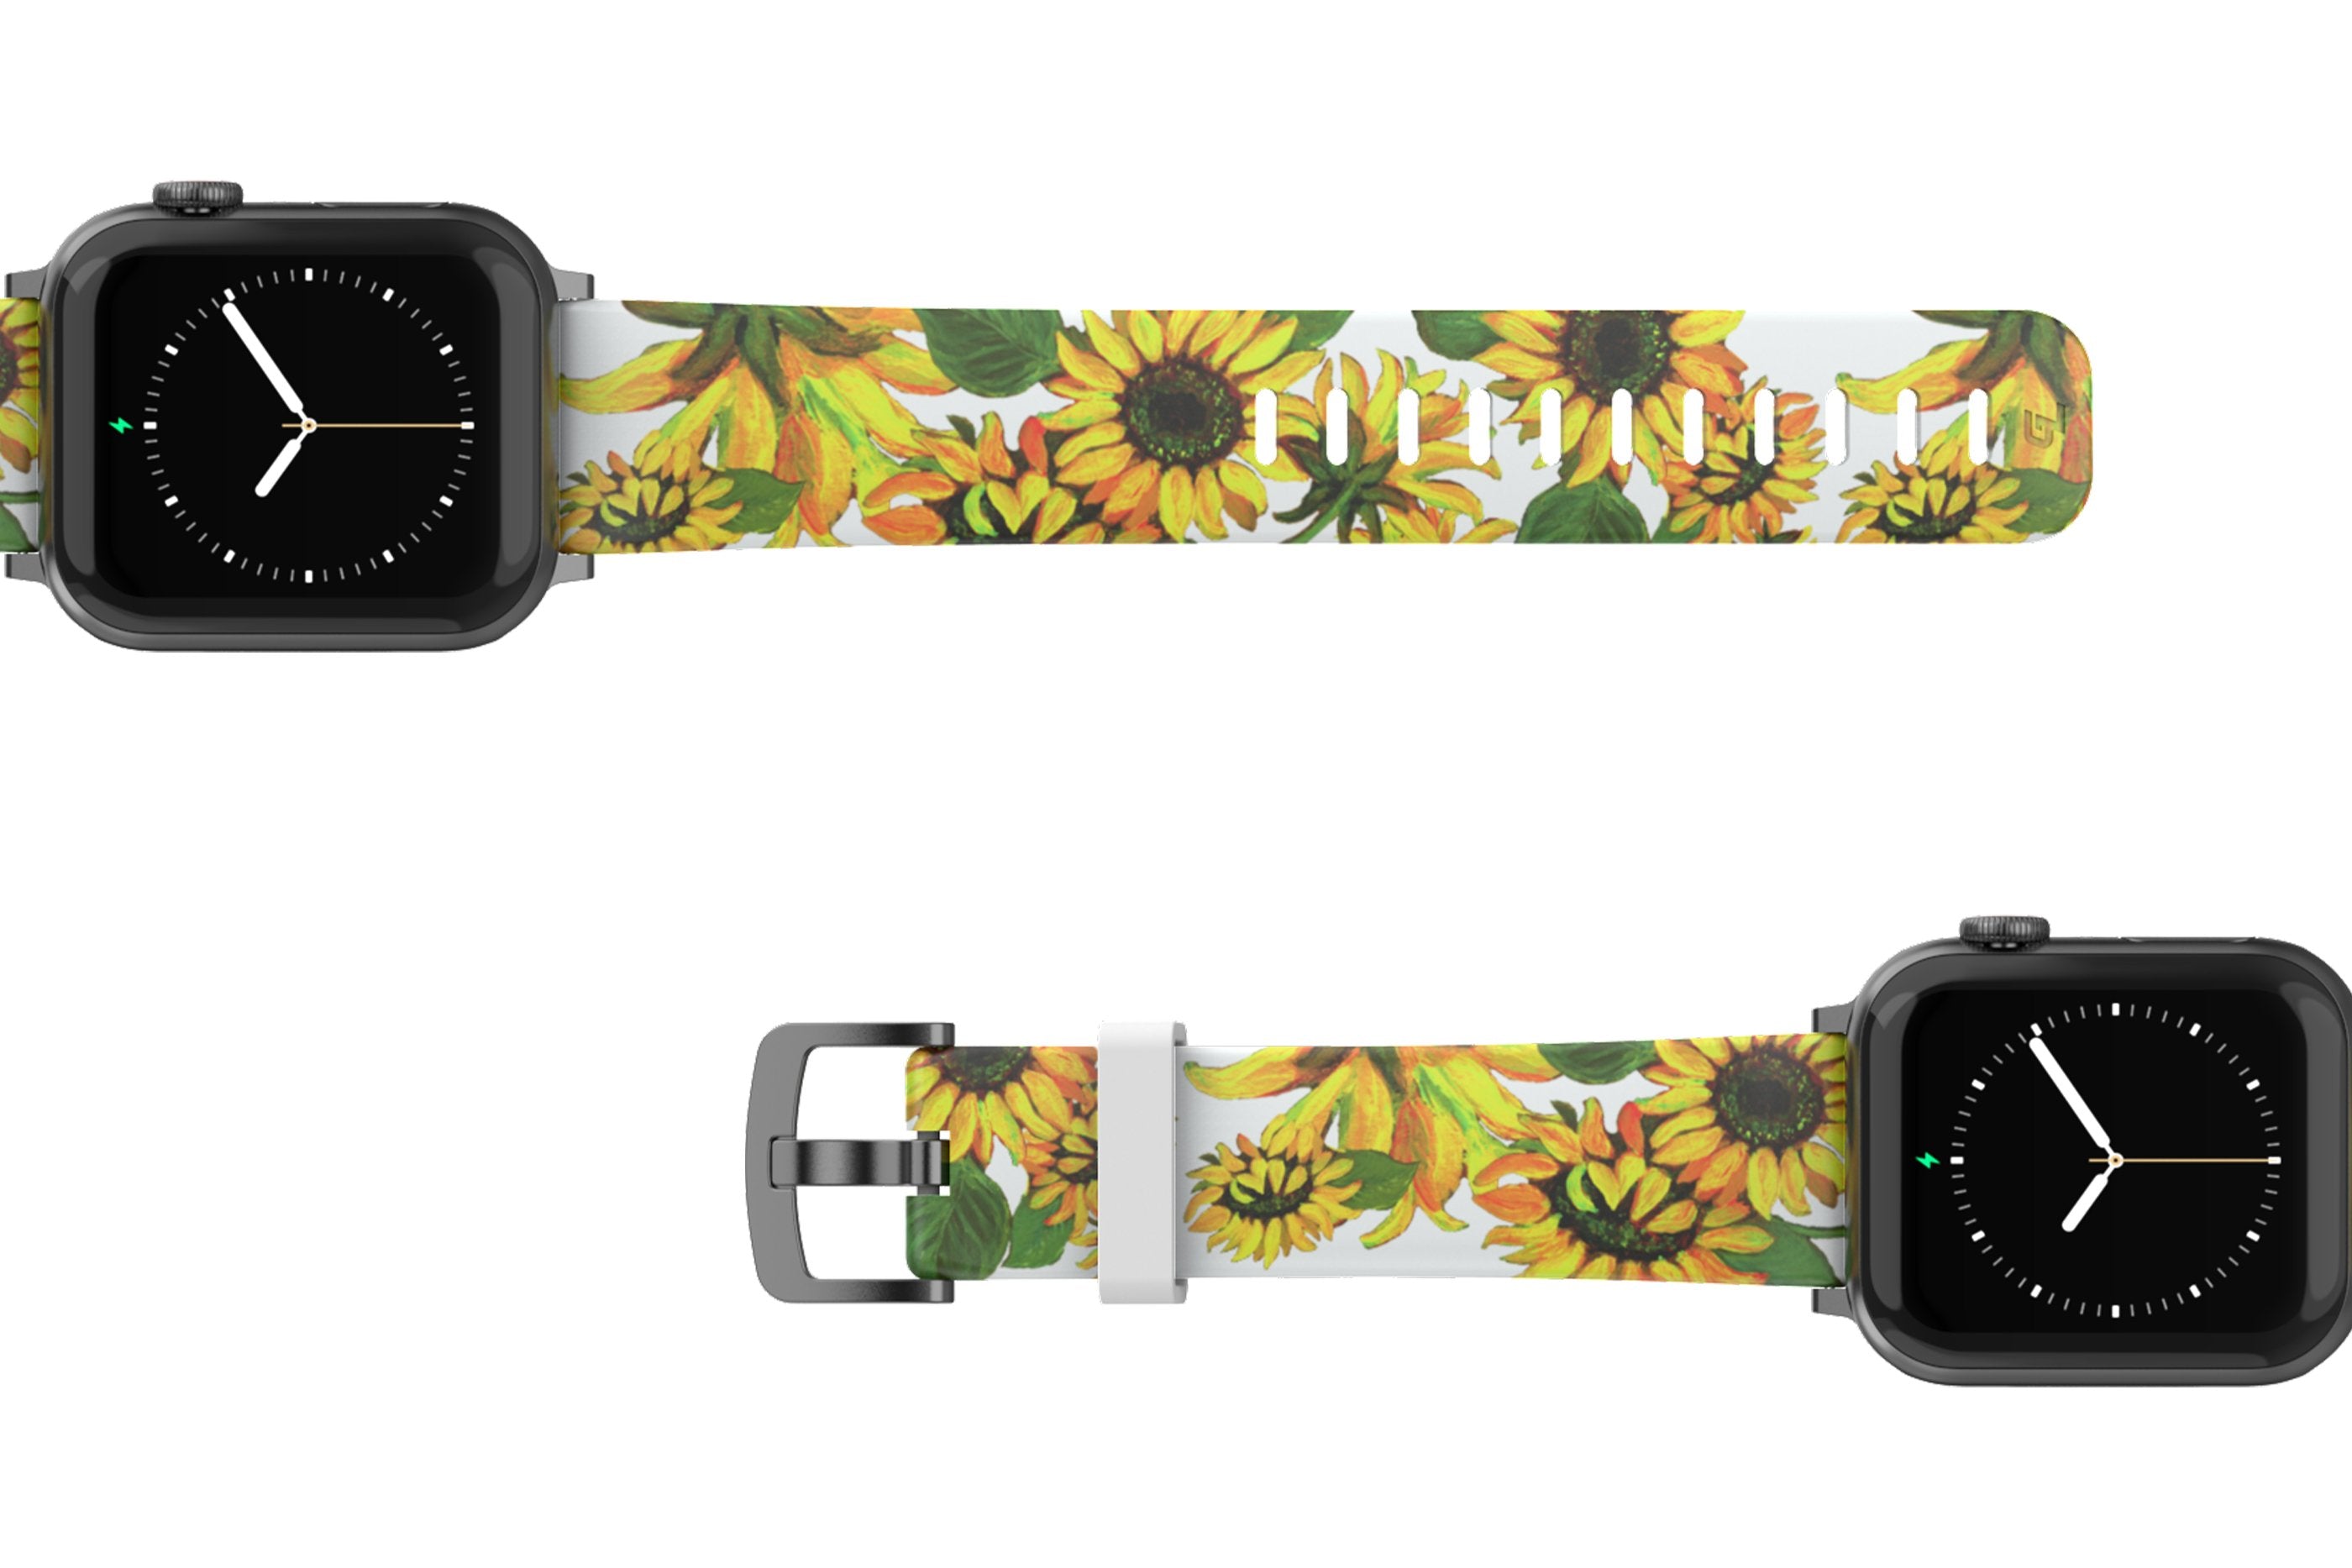 Sunflower Apple Watch Band with gray hardware viewed top down